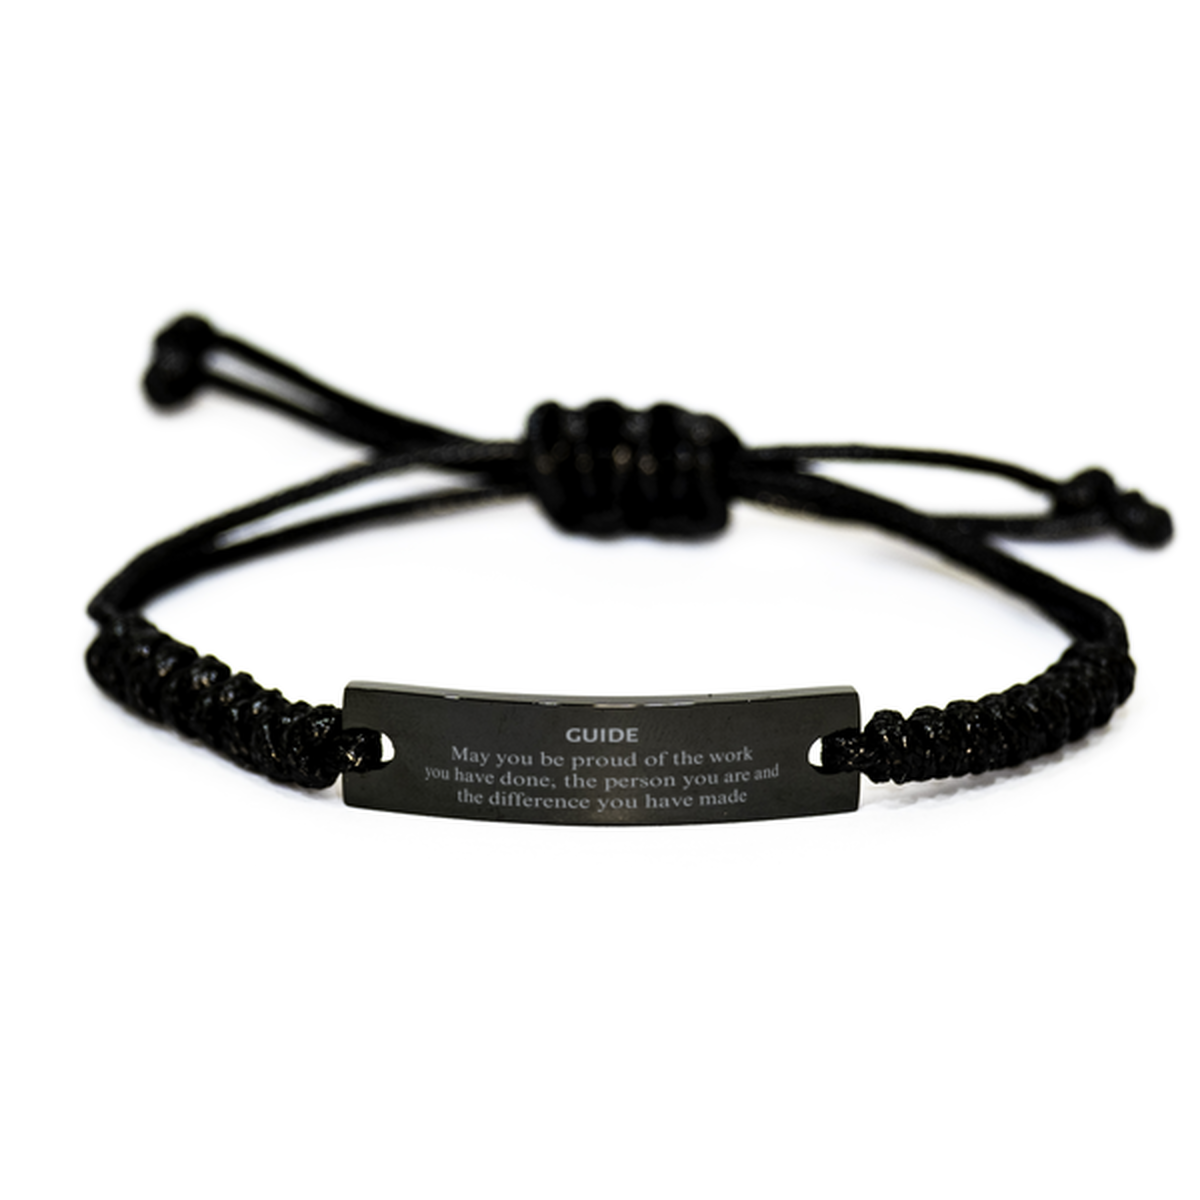 Guide May you be proud of the work you have done, Retirement Guide Black Rope Bracelet for Colleague Appreciation Gifts Amazing for Guide